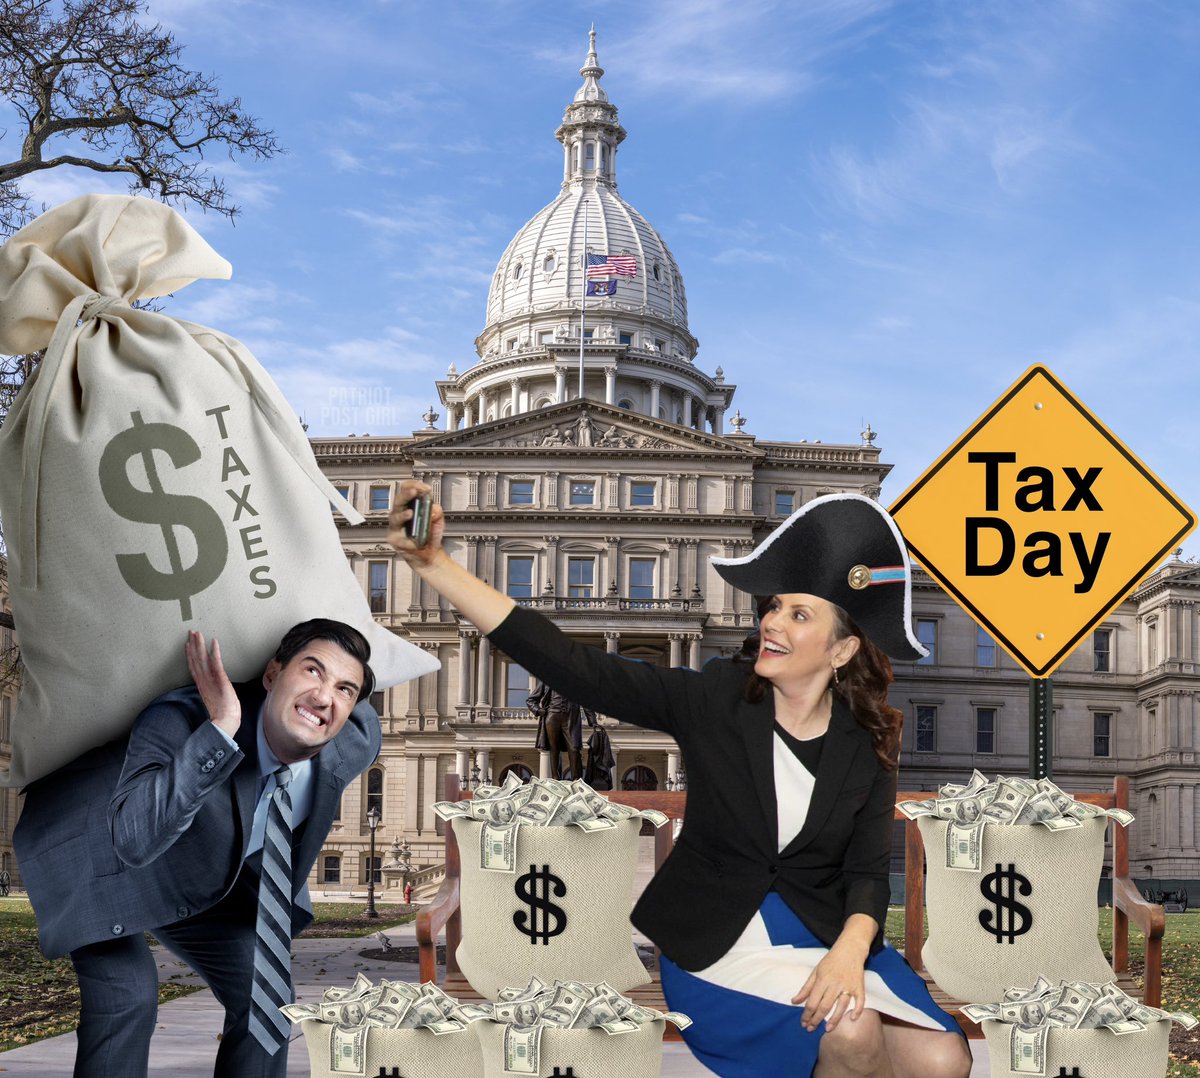 It’s Governor Whitmer’s favorite day. She can’t wait to spend your hard-earned money on her pet project policies. #PoorMichiganTaxDay #PoorMichiganLooksPoor